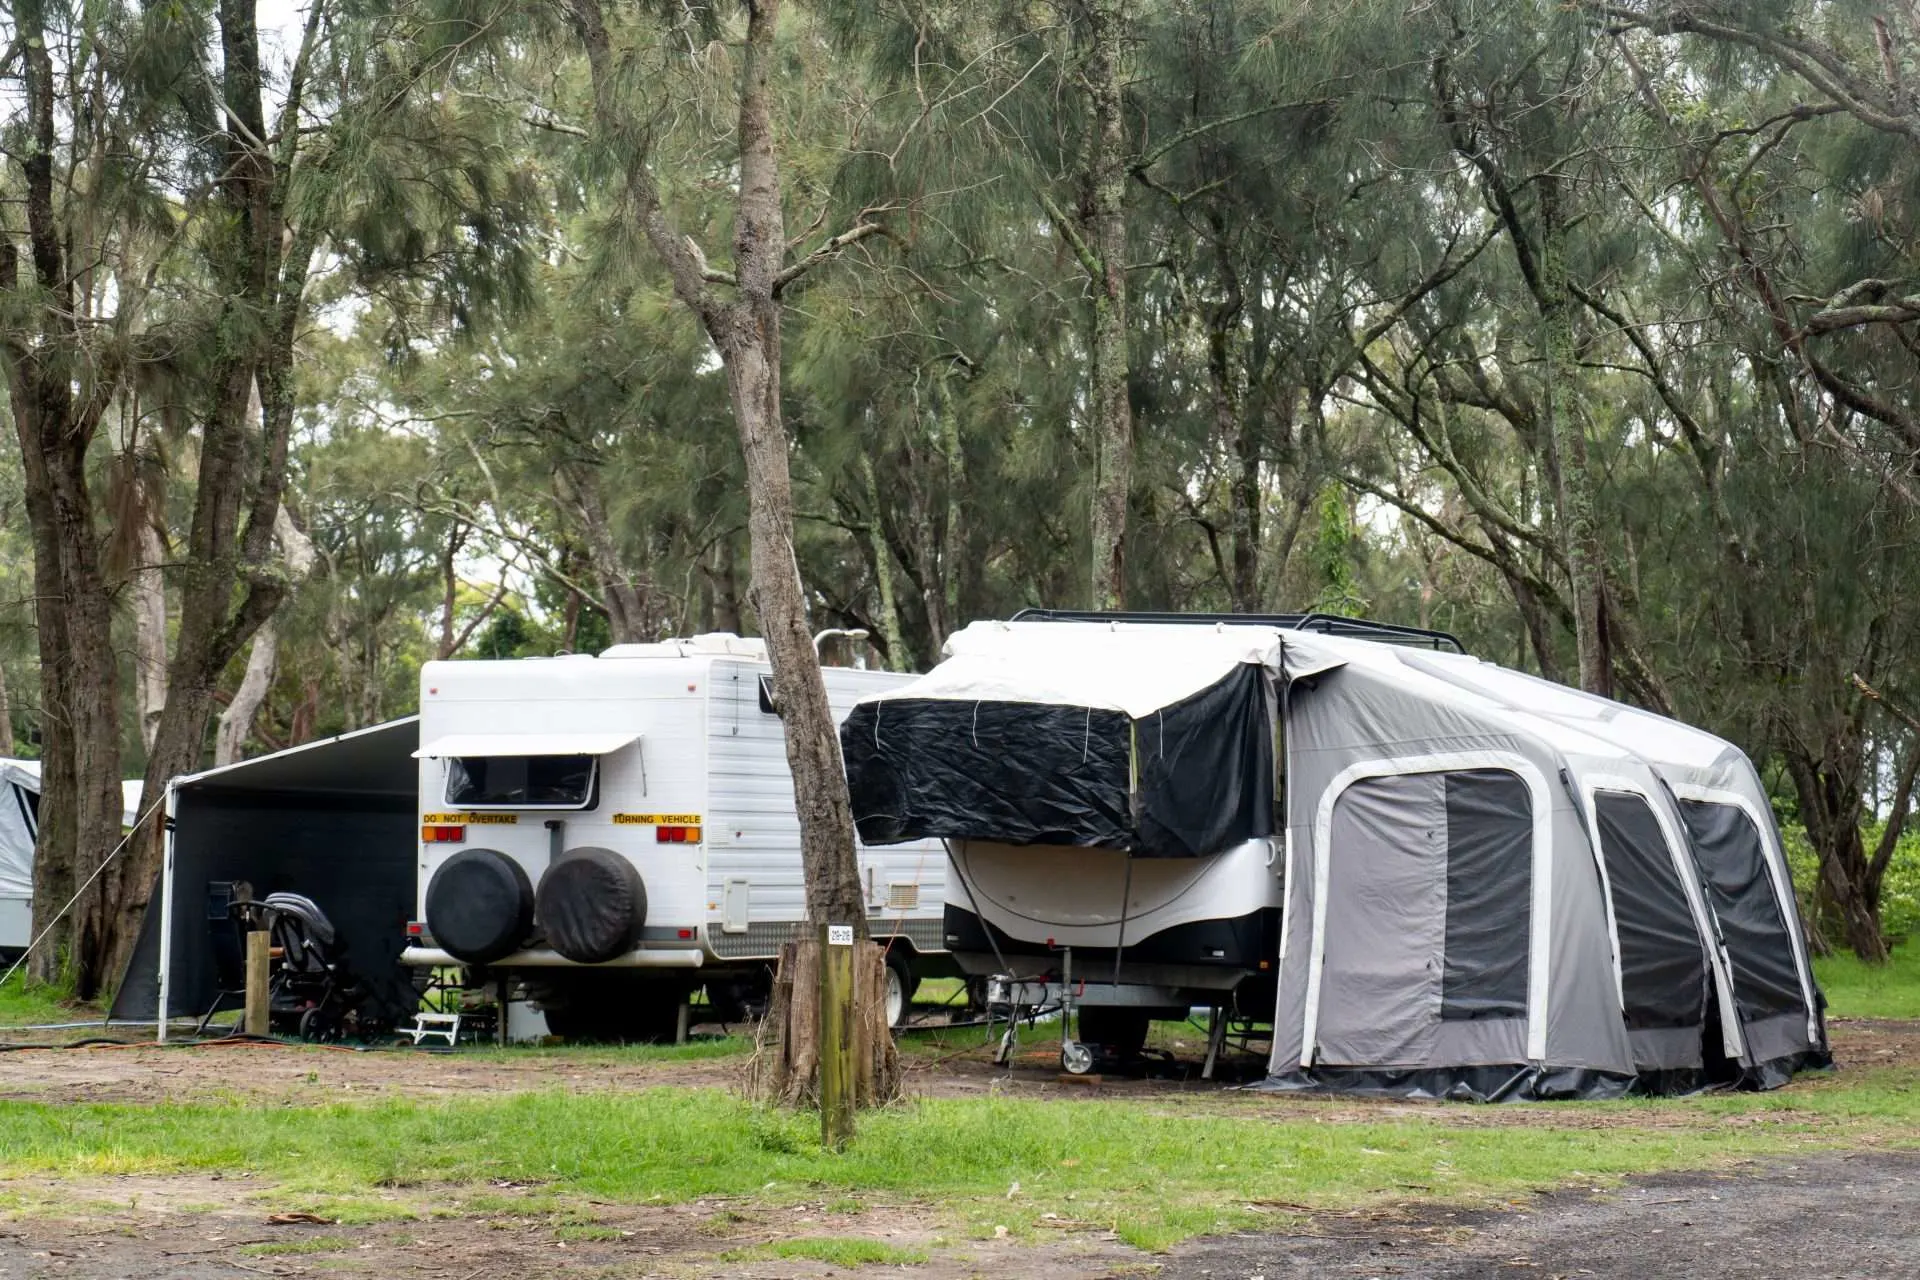 RV awnings open in rainy weather